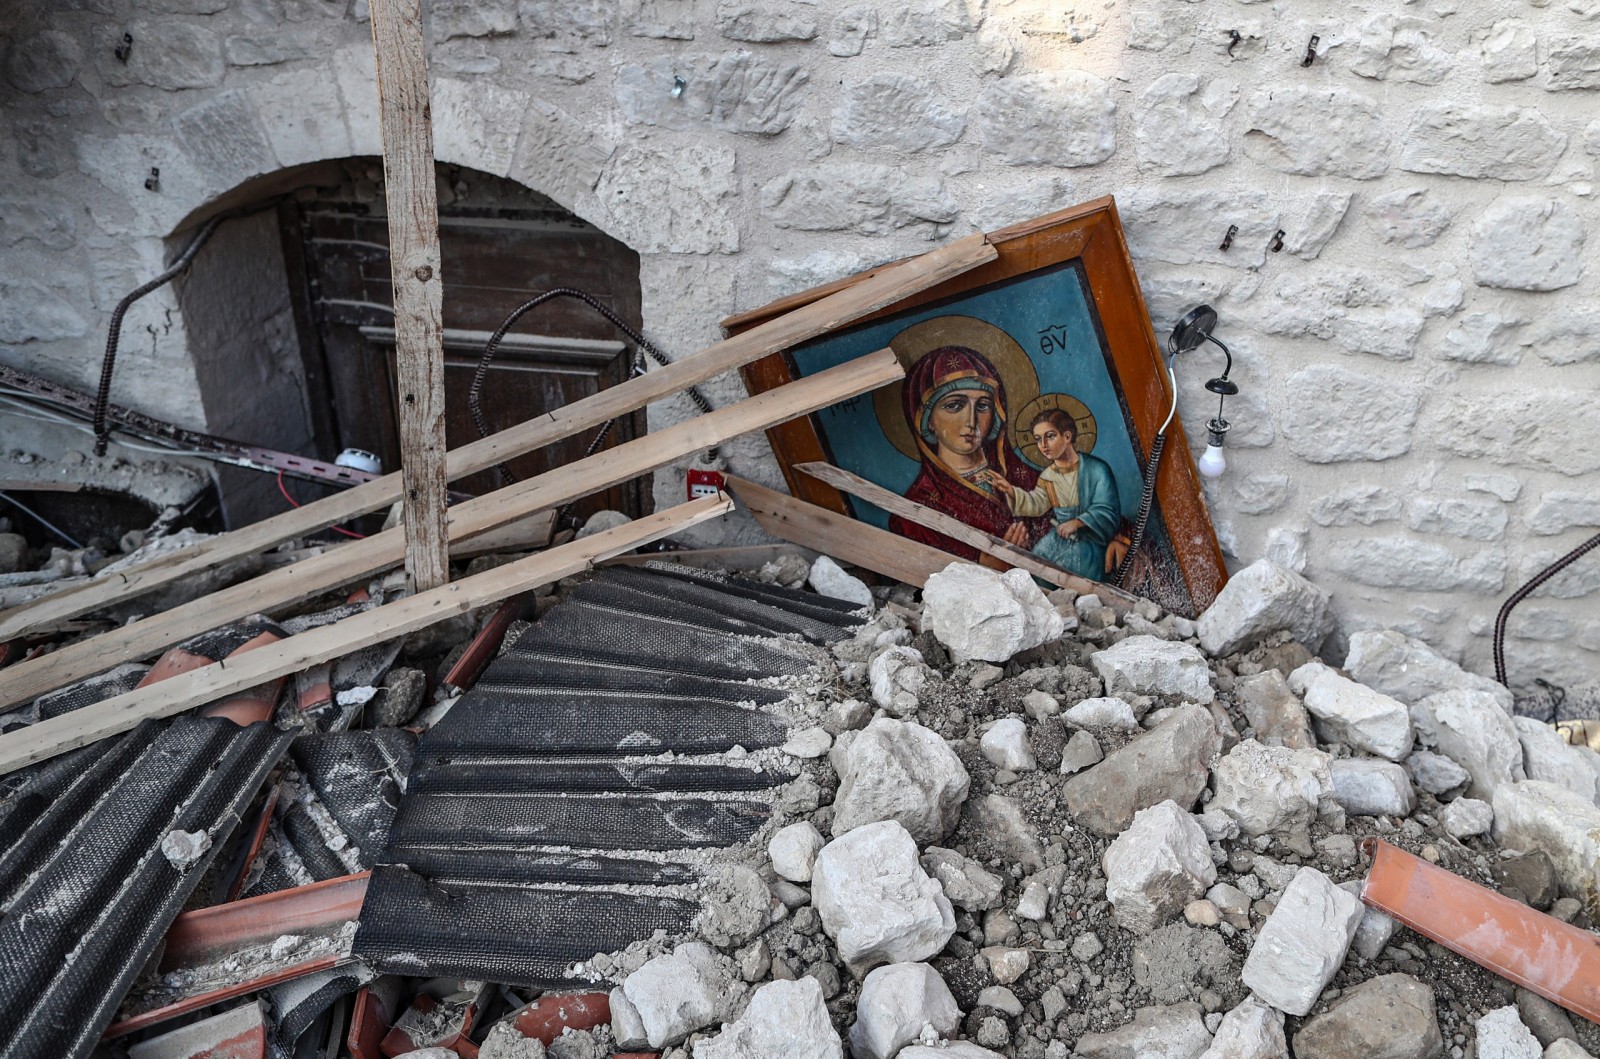 epa10462921 An icon in the rubble of the collapsed Virgin Mary Greek Orthodox Church after an earthquake in Altinozu, district of Hatay, Turkey, 12 February 2023. More than 27,000 people have died and thousands more were injured after two major earthquakes struck southern Turkey and northern Syria on 06 February. Authorities fear the death toll will keep climbing as rescuers look for survivors across the regions.  EPA/ERDEM SAHIN  ATTENTION: This Image is part of a PHOTO SET